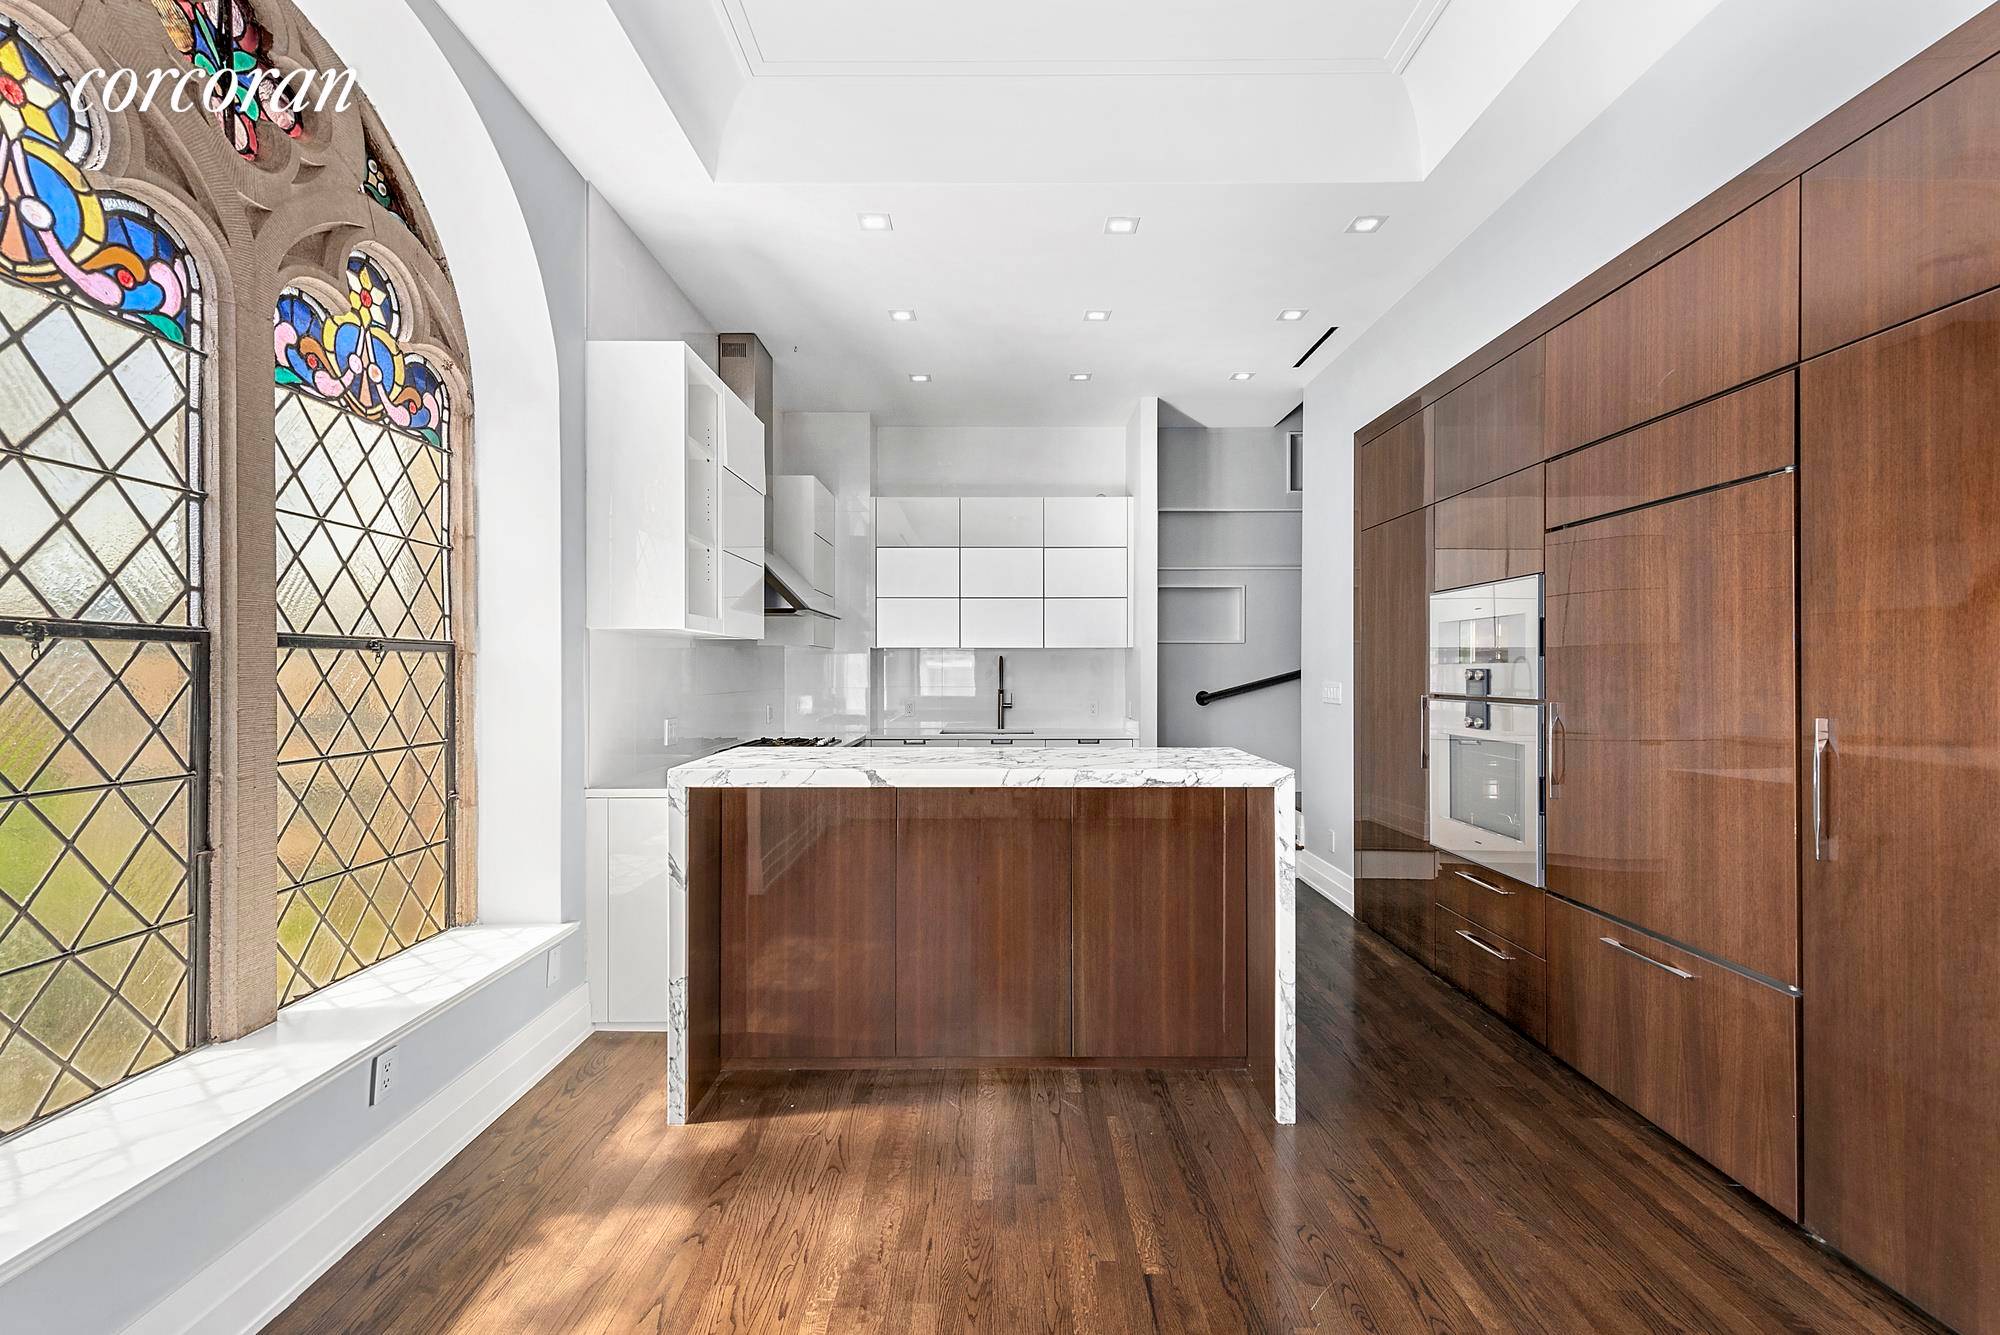 Dont miss your chance to own this historic and spectacular 2025 SF duplex in the Abbey condominium located moments from the magnificent four acre Stuyvesant Square Park !